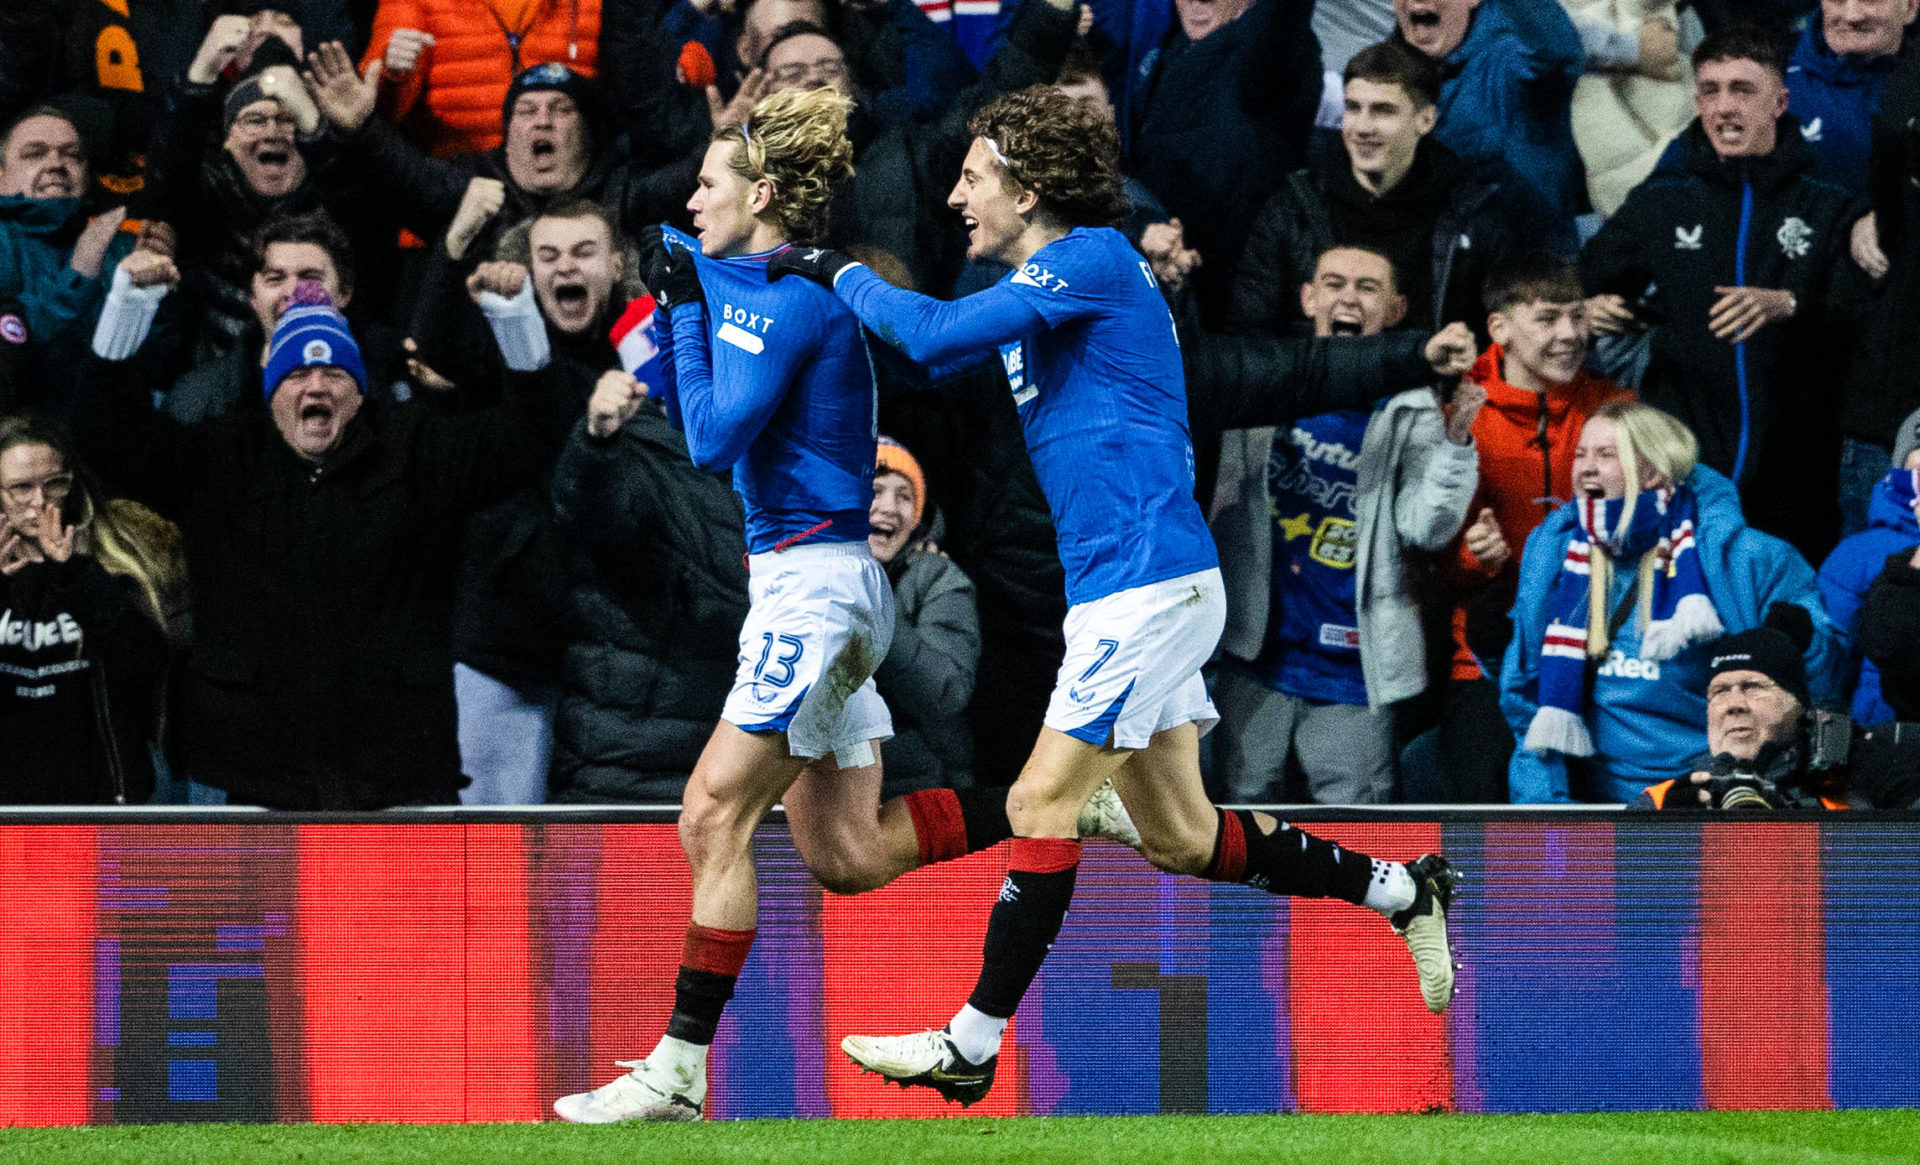 Rangers make it FIVE wins in a row with 2-1 victory over Aberdeen